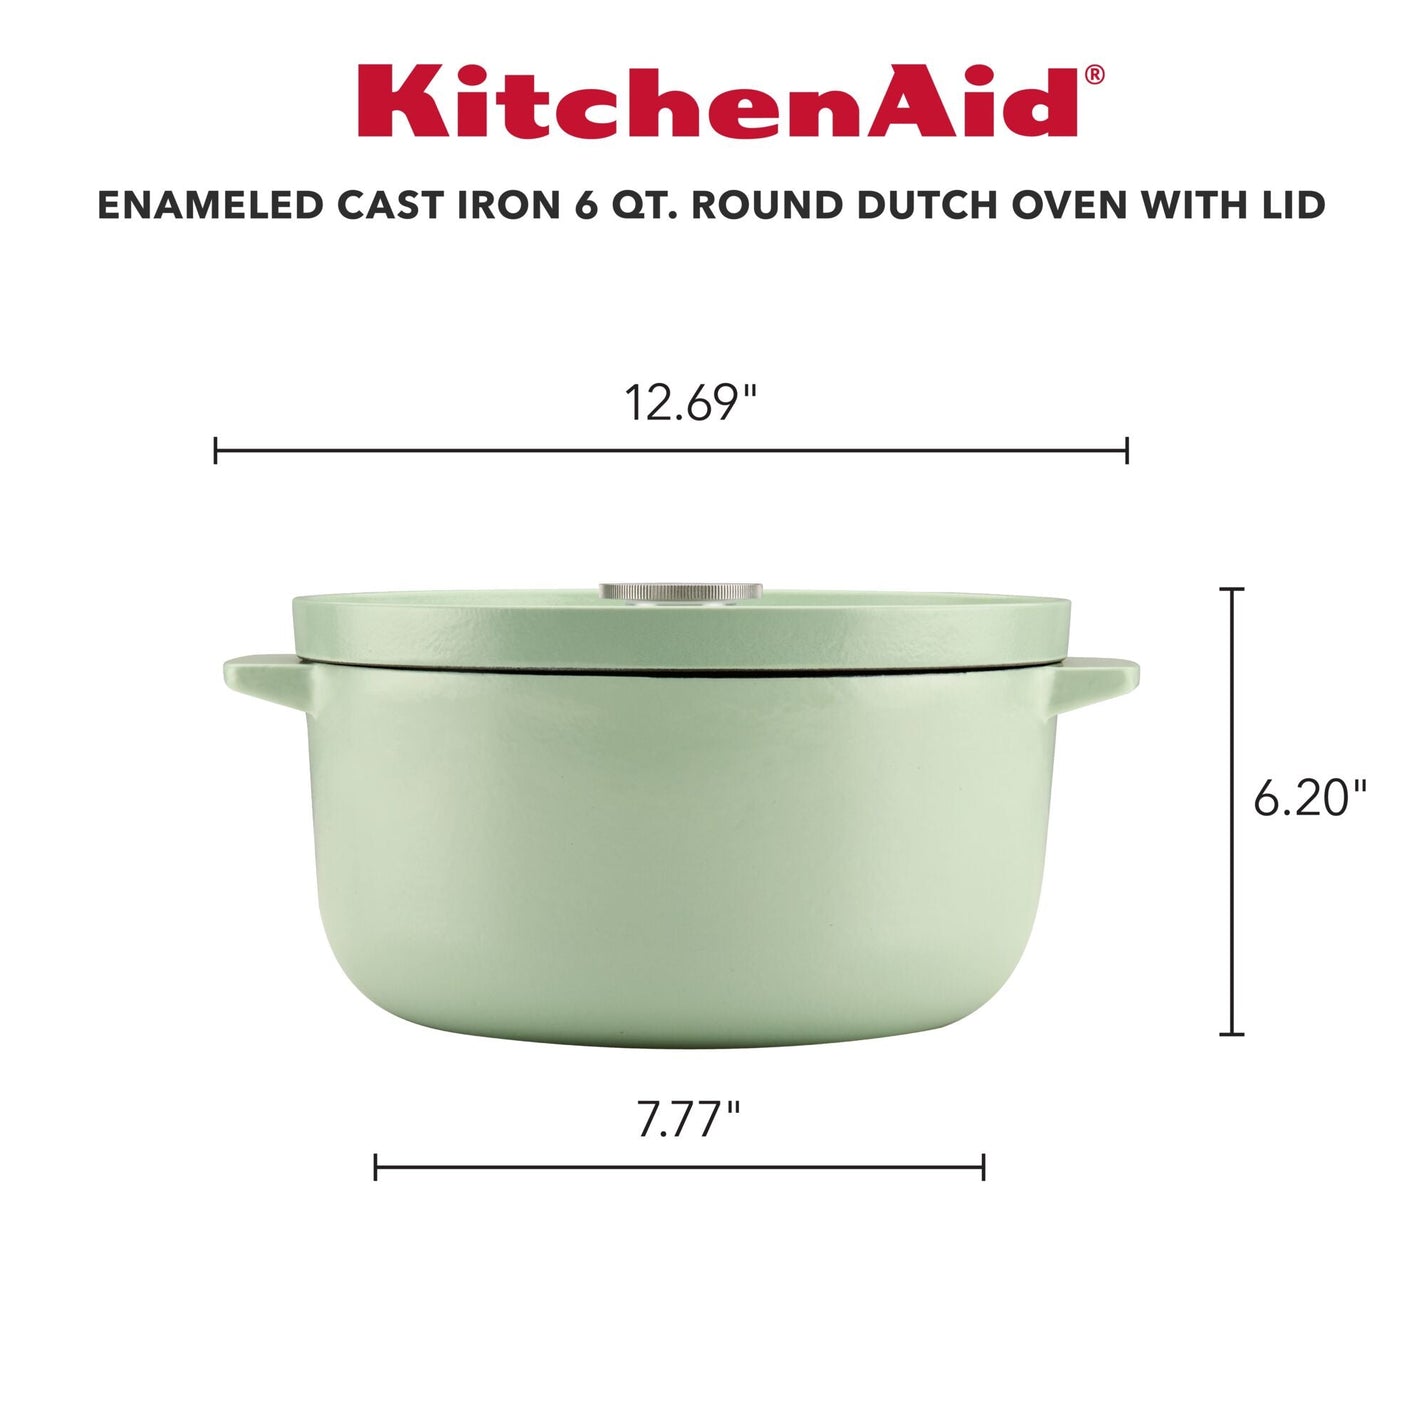 Kitchenaid Dutch Oven with Lid 5.7L Review, Casserole dish and Dutch oven